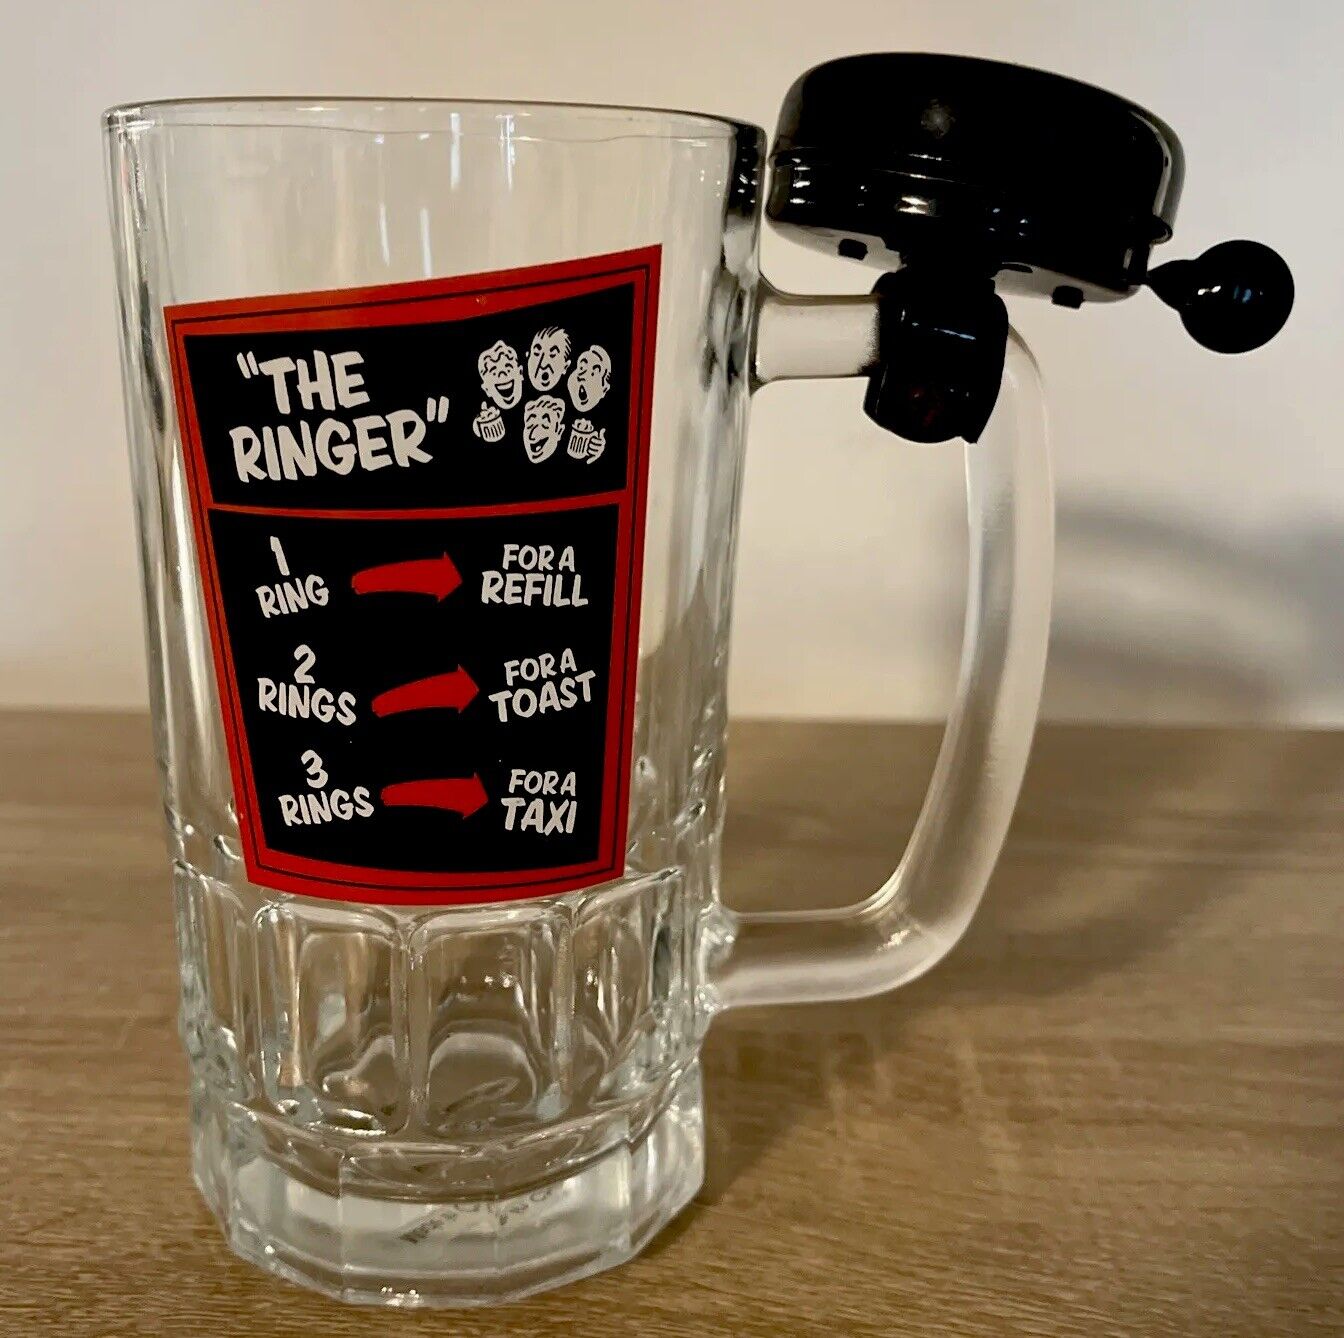 Vintage The Ringer Beer Glass Mug With Bicycle Bell It Works 1 Ring For Refill